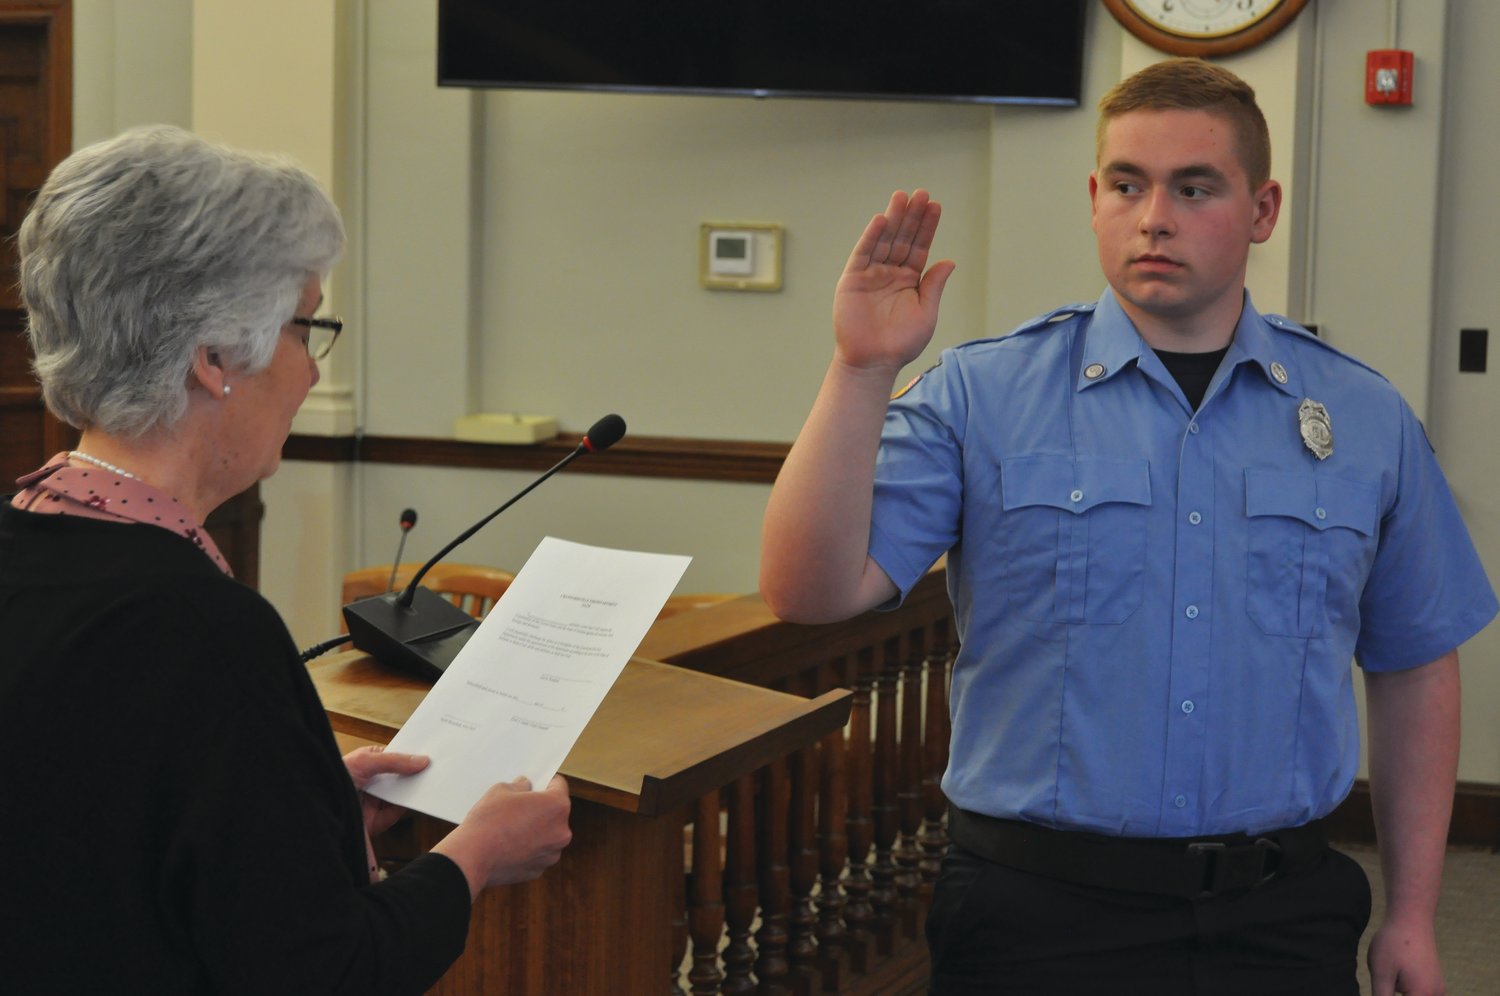 Gavin Waddell takes the oath as a Crawfordsville firefighter/EMT from Clerk-Treasurer Terri Gadd in the City Building on Wednesday.